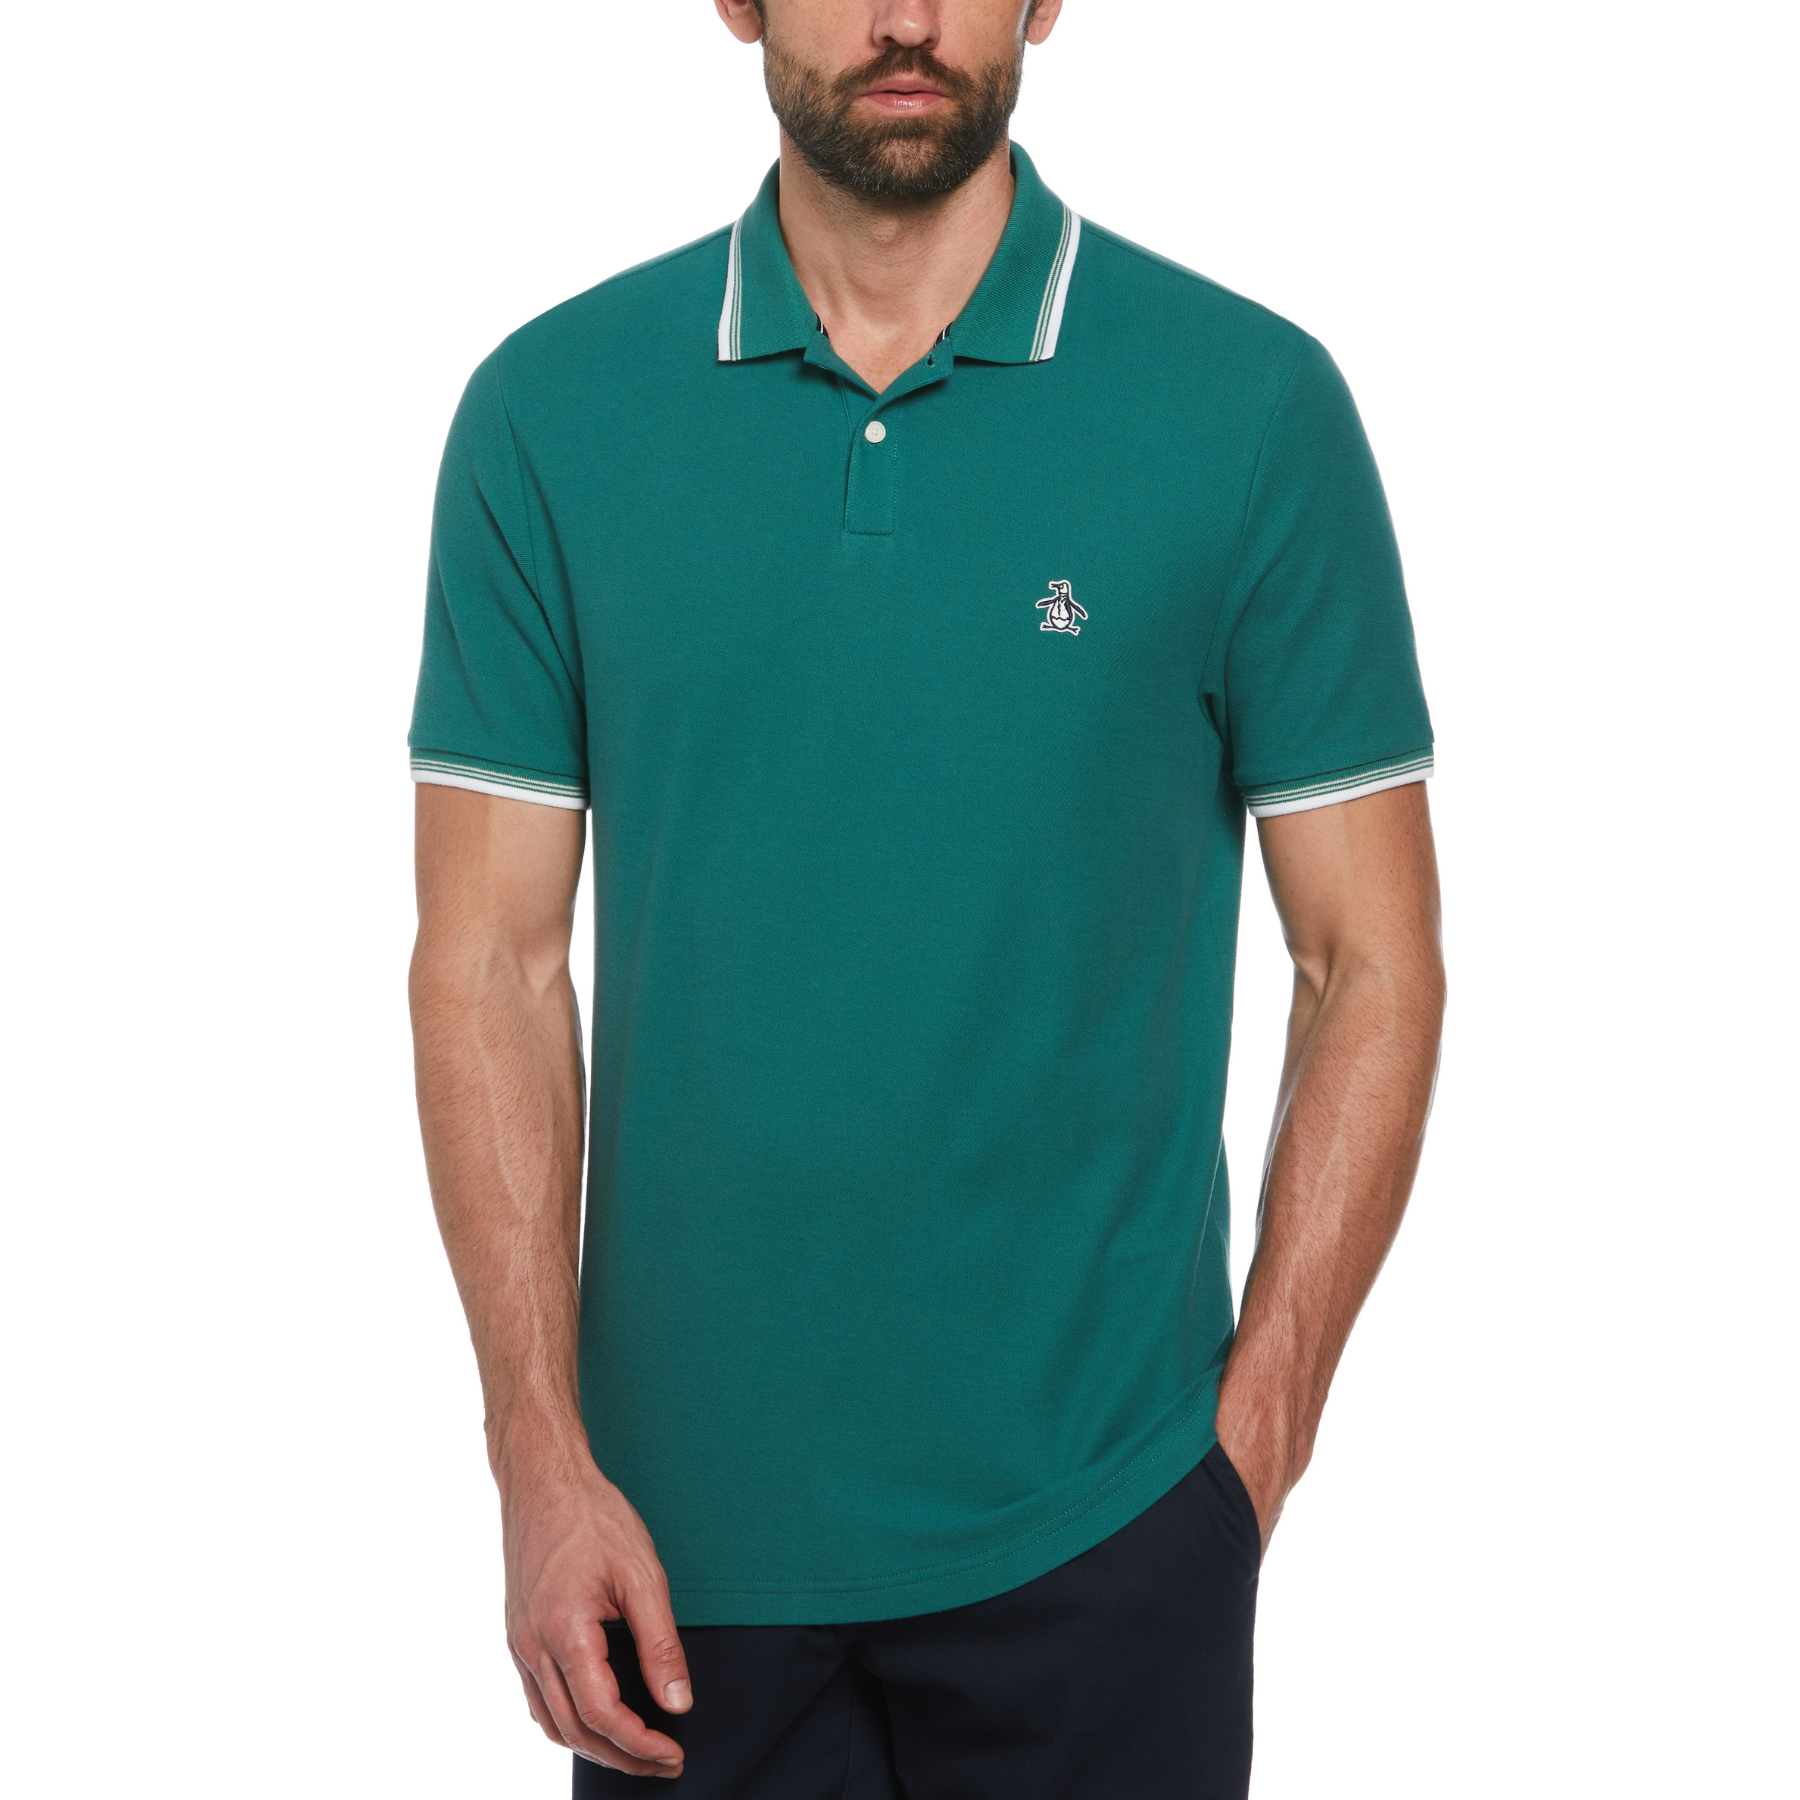 View Original Penguin Organic Cotton Pique Short Sleeve Polo Shirt With Tipped Collar In Ant Green Mens information